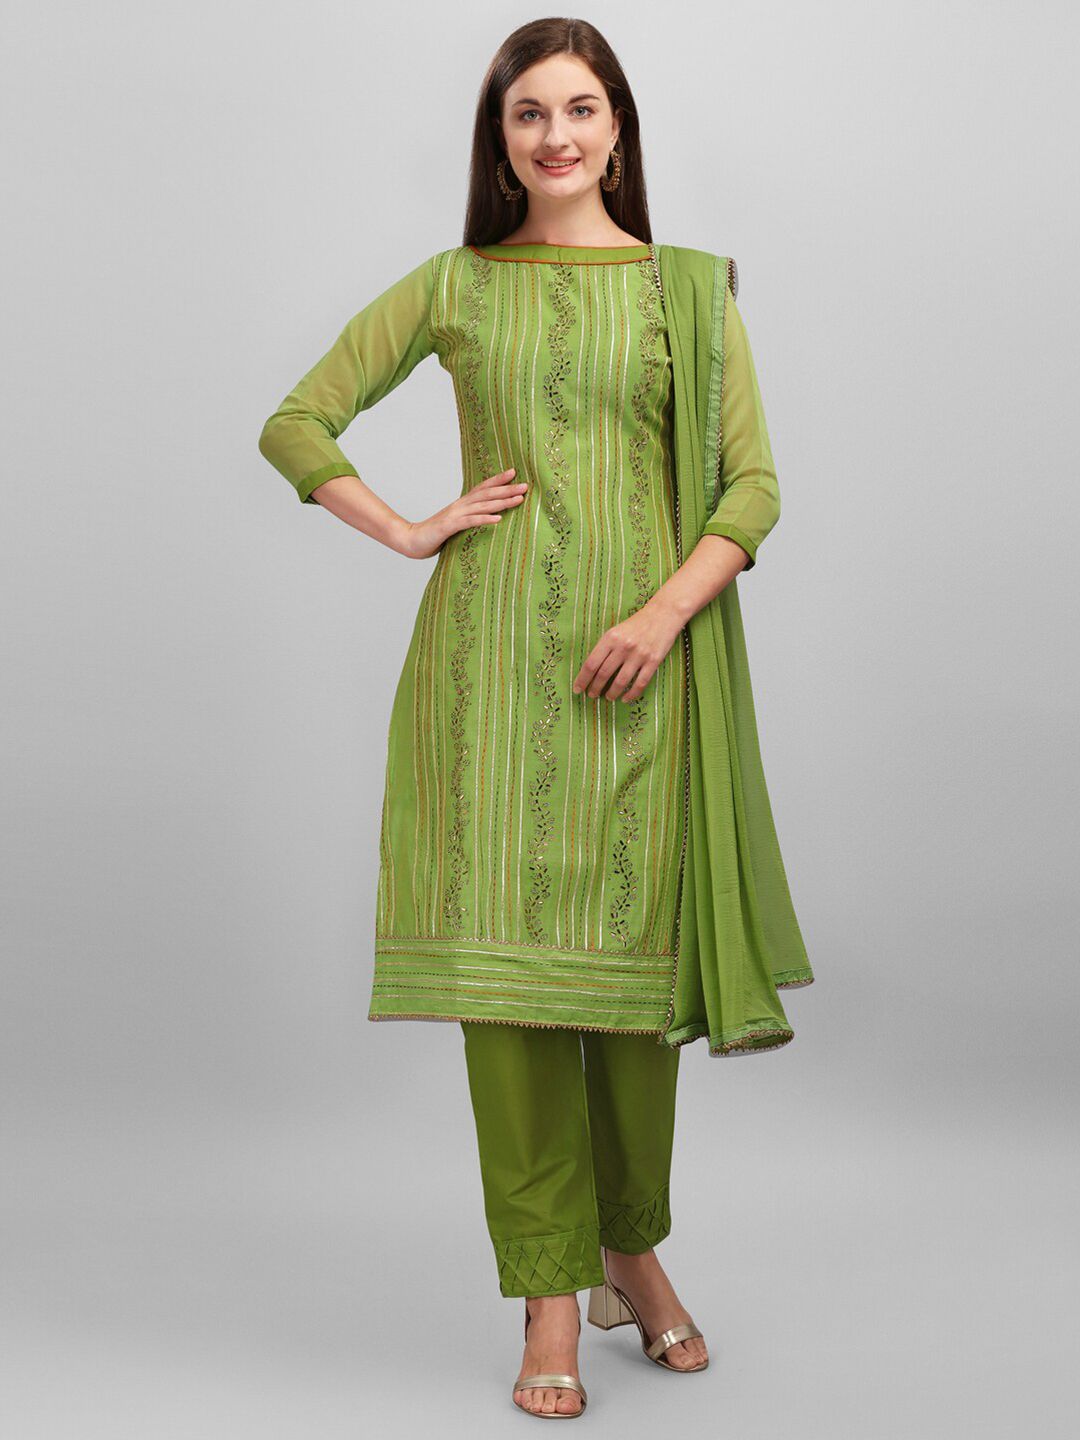 mf Green & Beige Embroidered Unstitched Dress Material Price in India